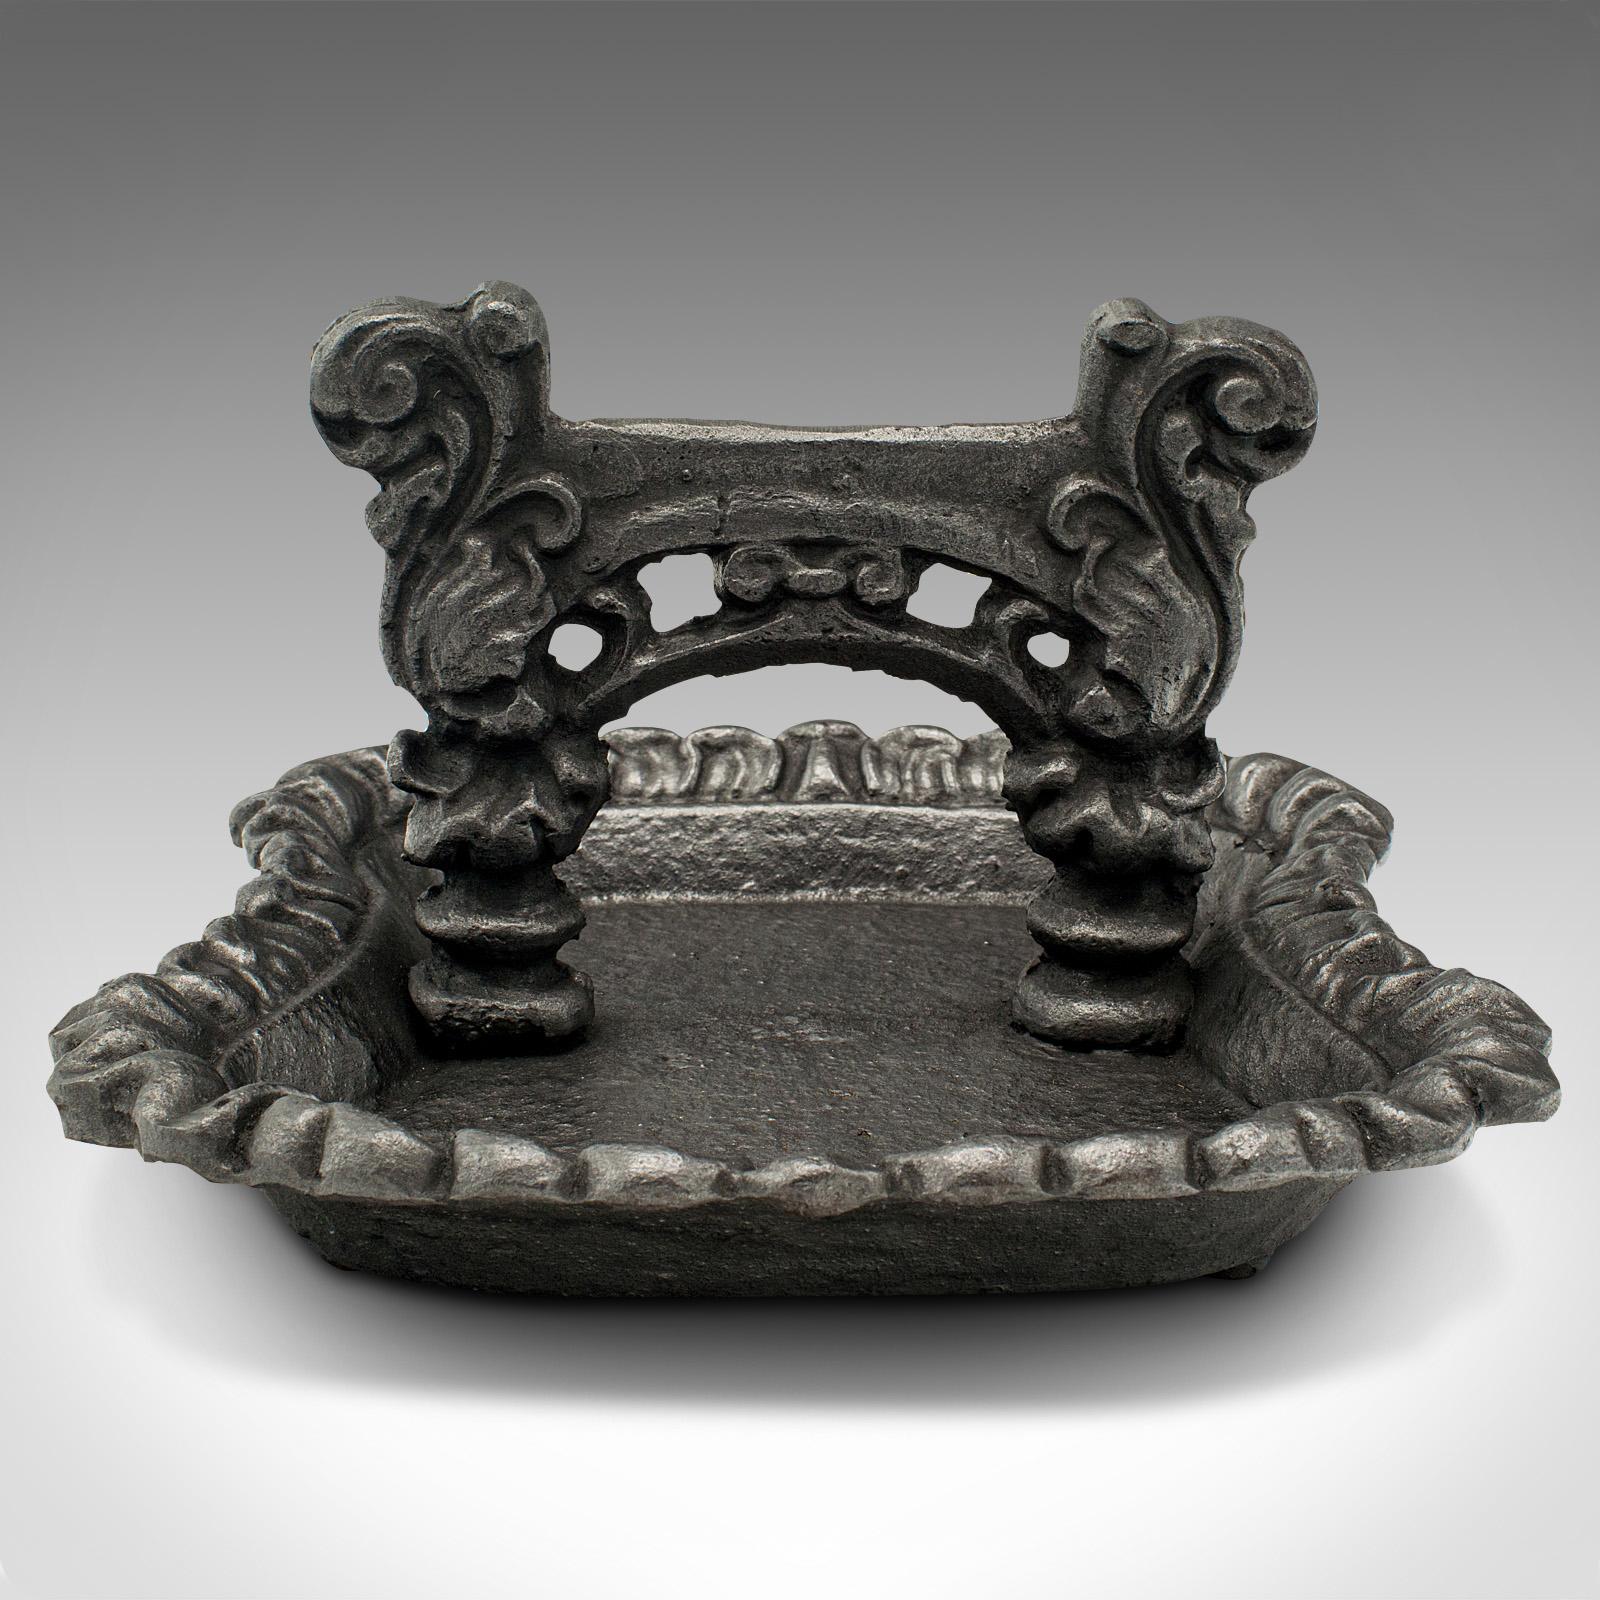 This is an antique London townhouse boot scraper. An English, cast iron doorway shoe pull, dating to the Georgian period, circa 1750.

Pleasingly ornate, early Georgian period scrape
Displays a desirable aged patina and in good order
Cast iron in